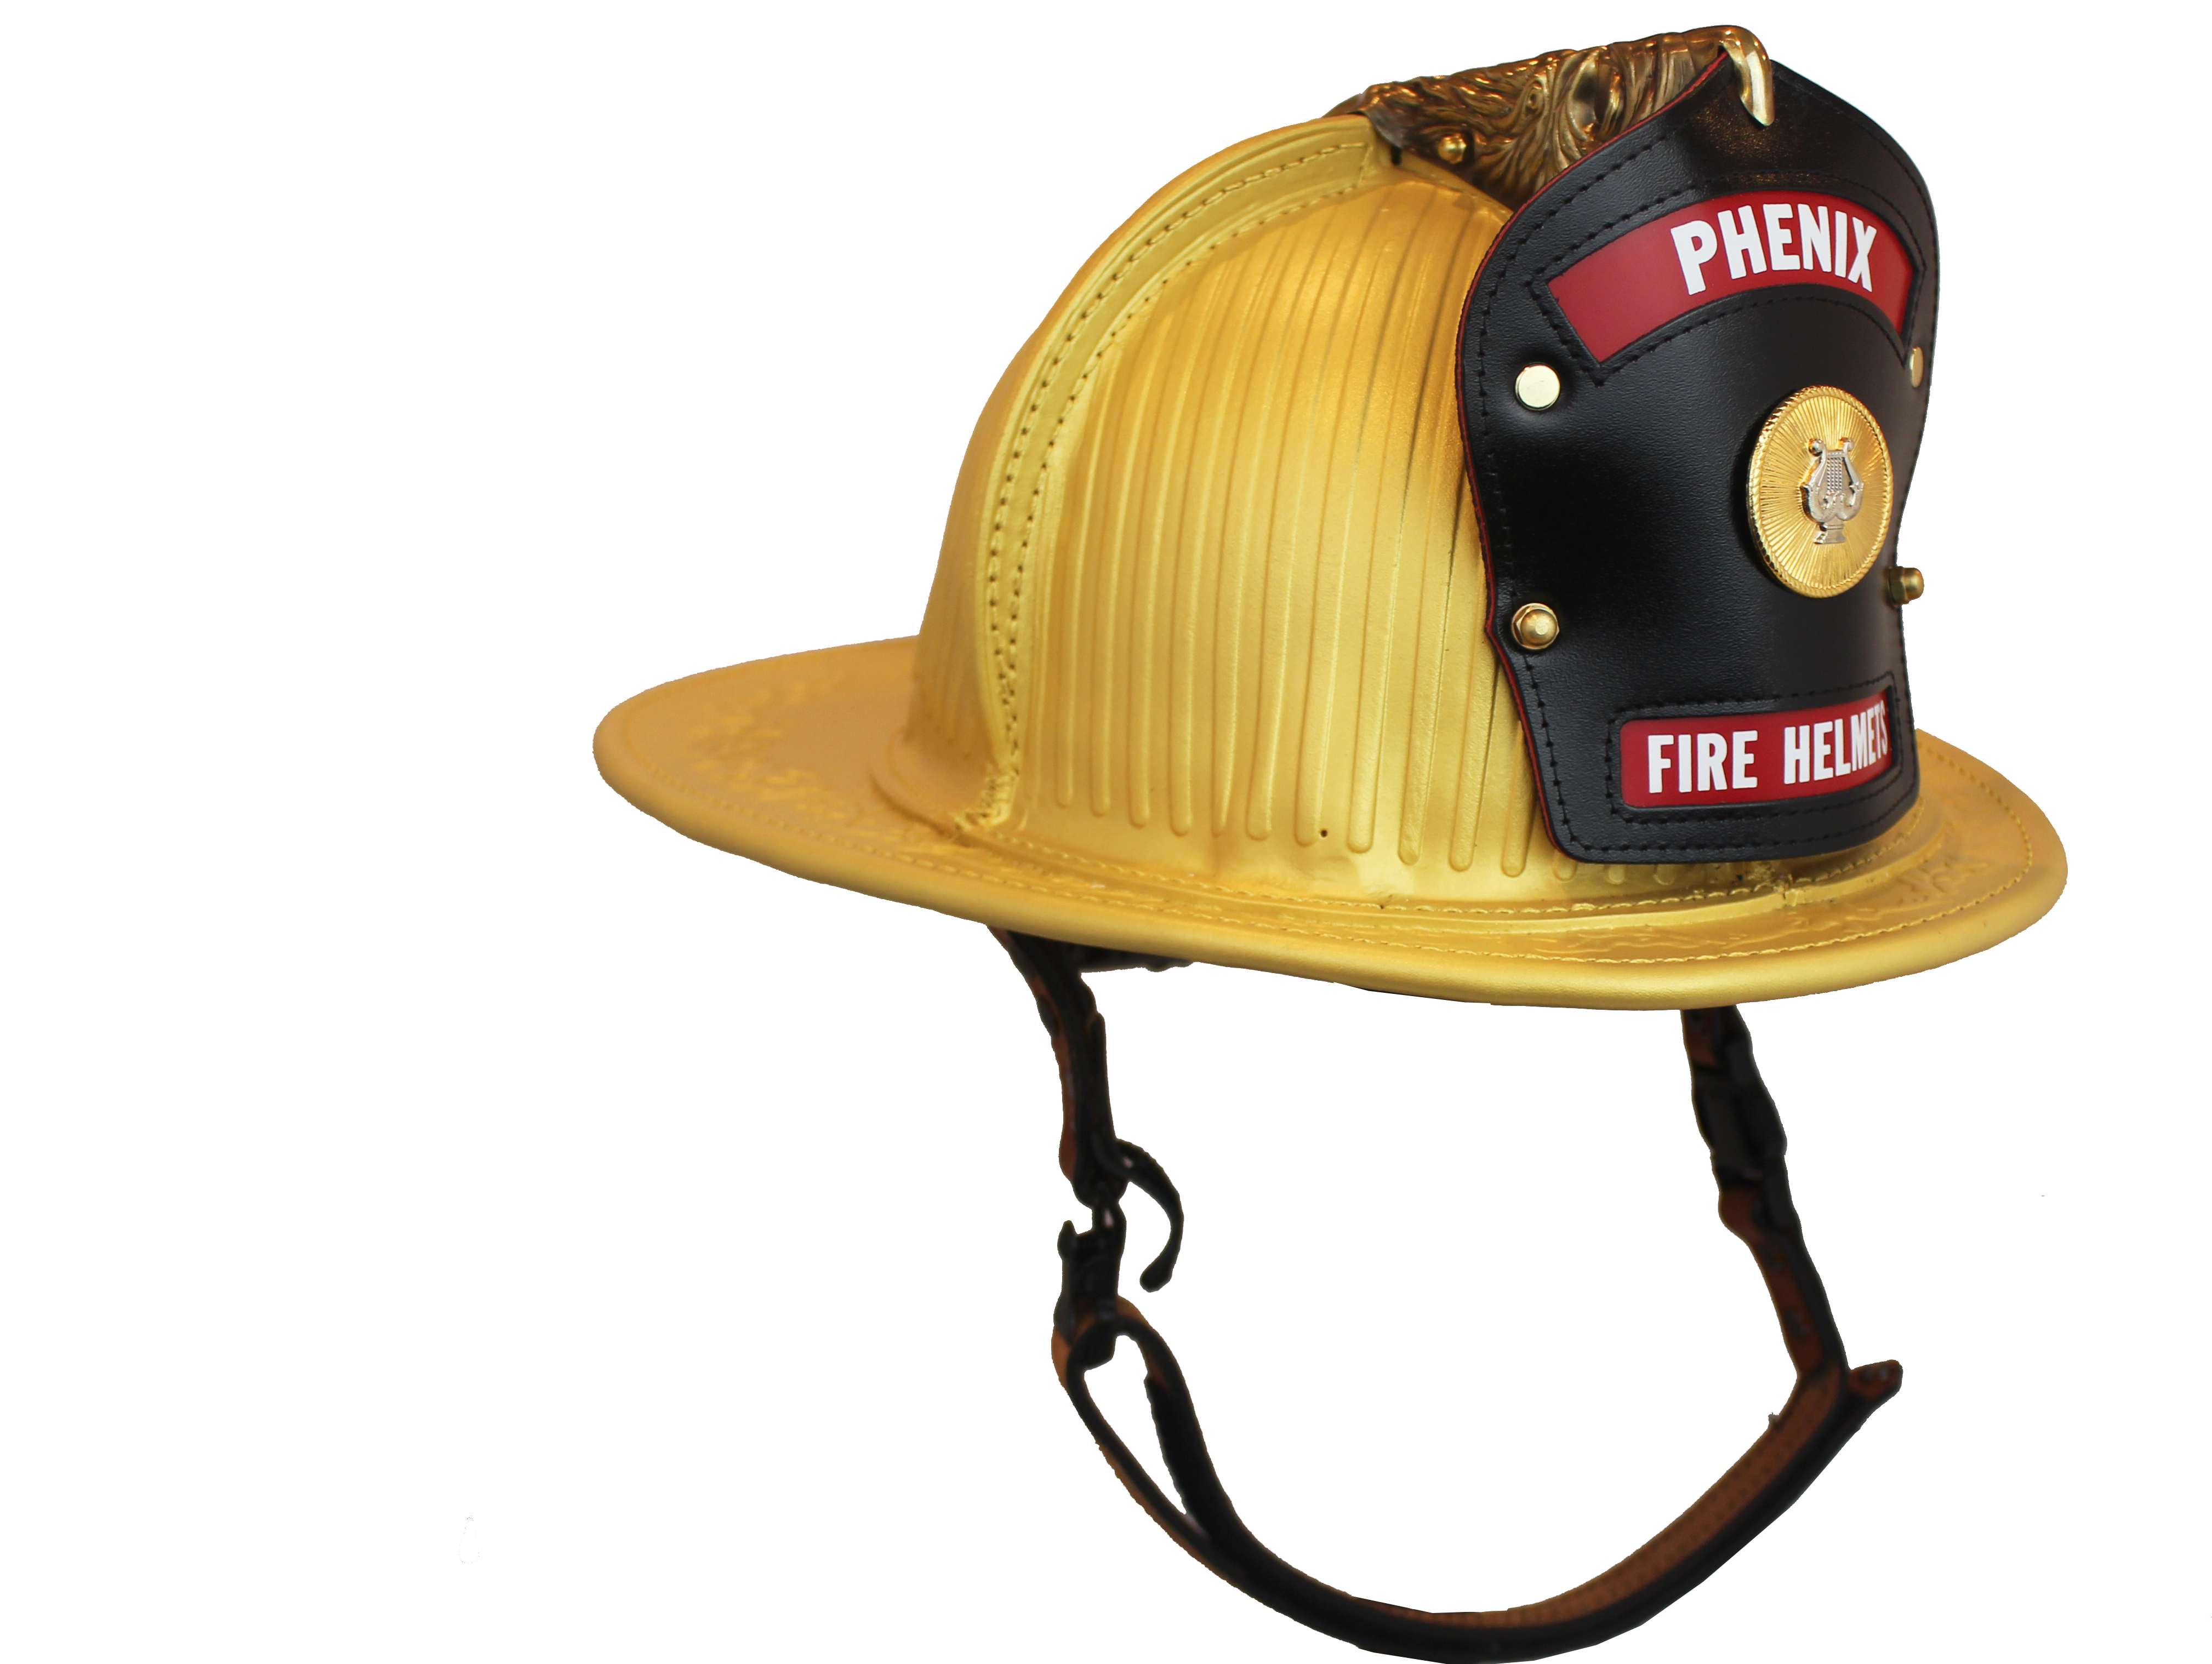 A Firefighter Hat With A Black Strap